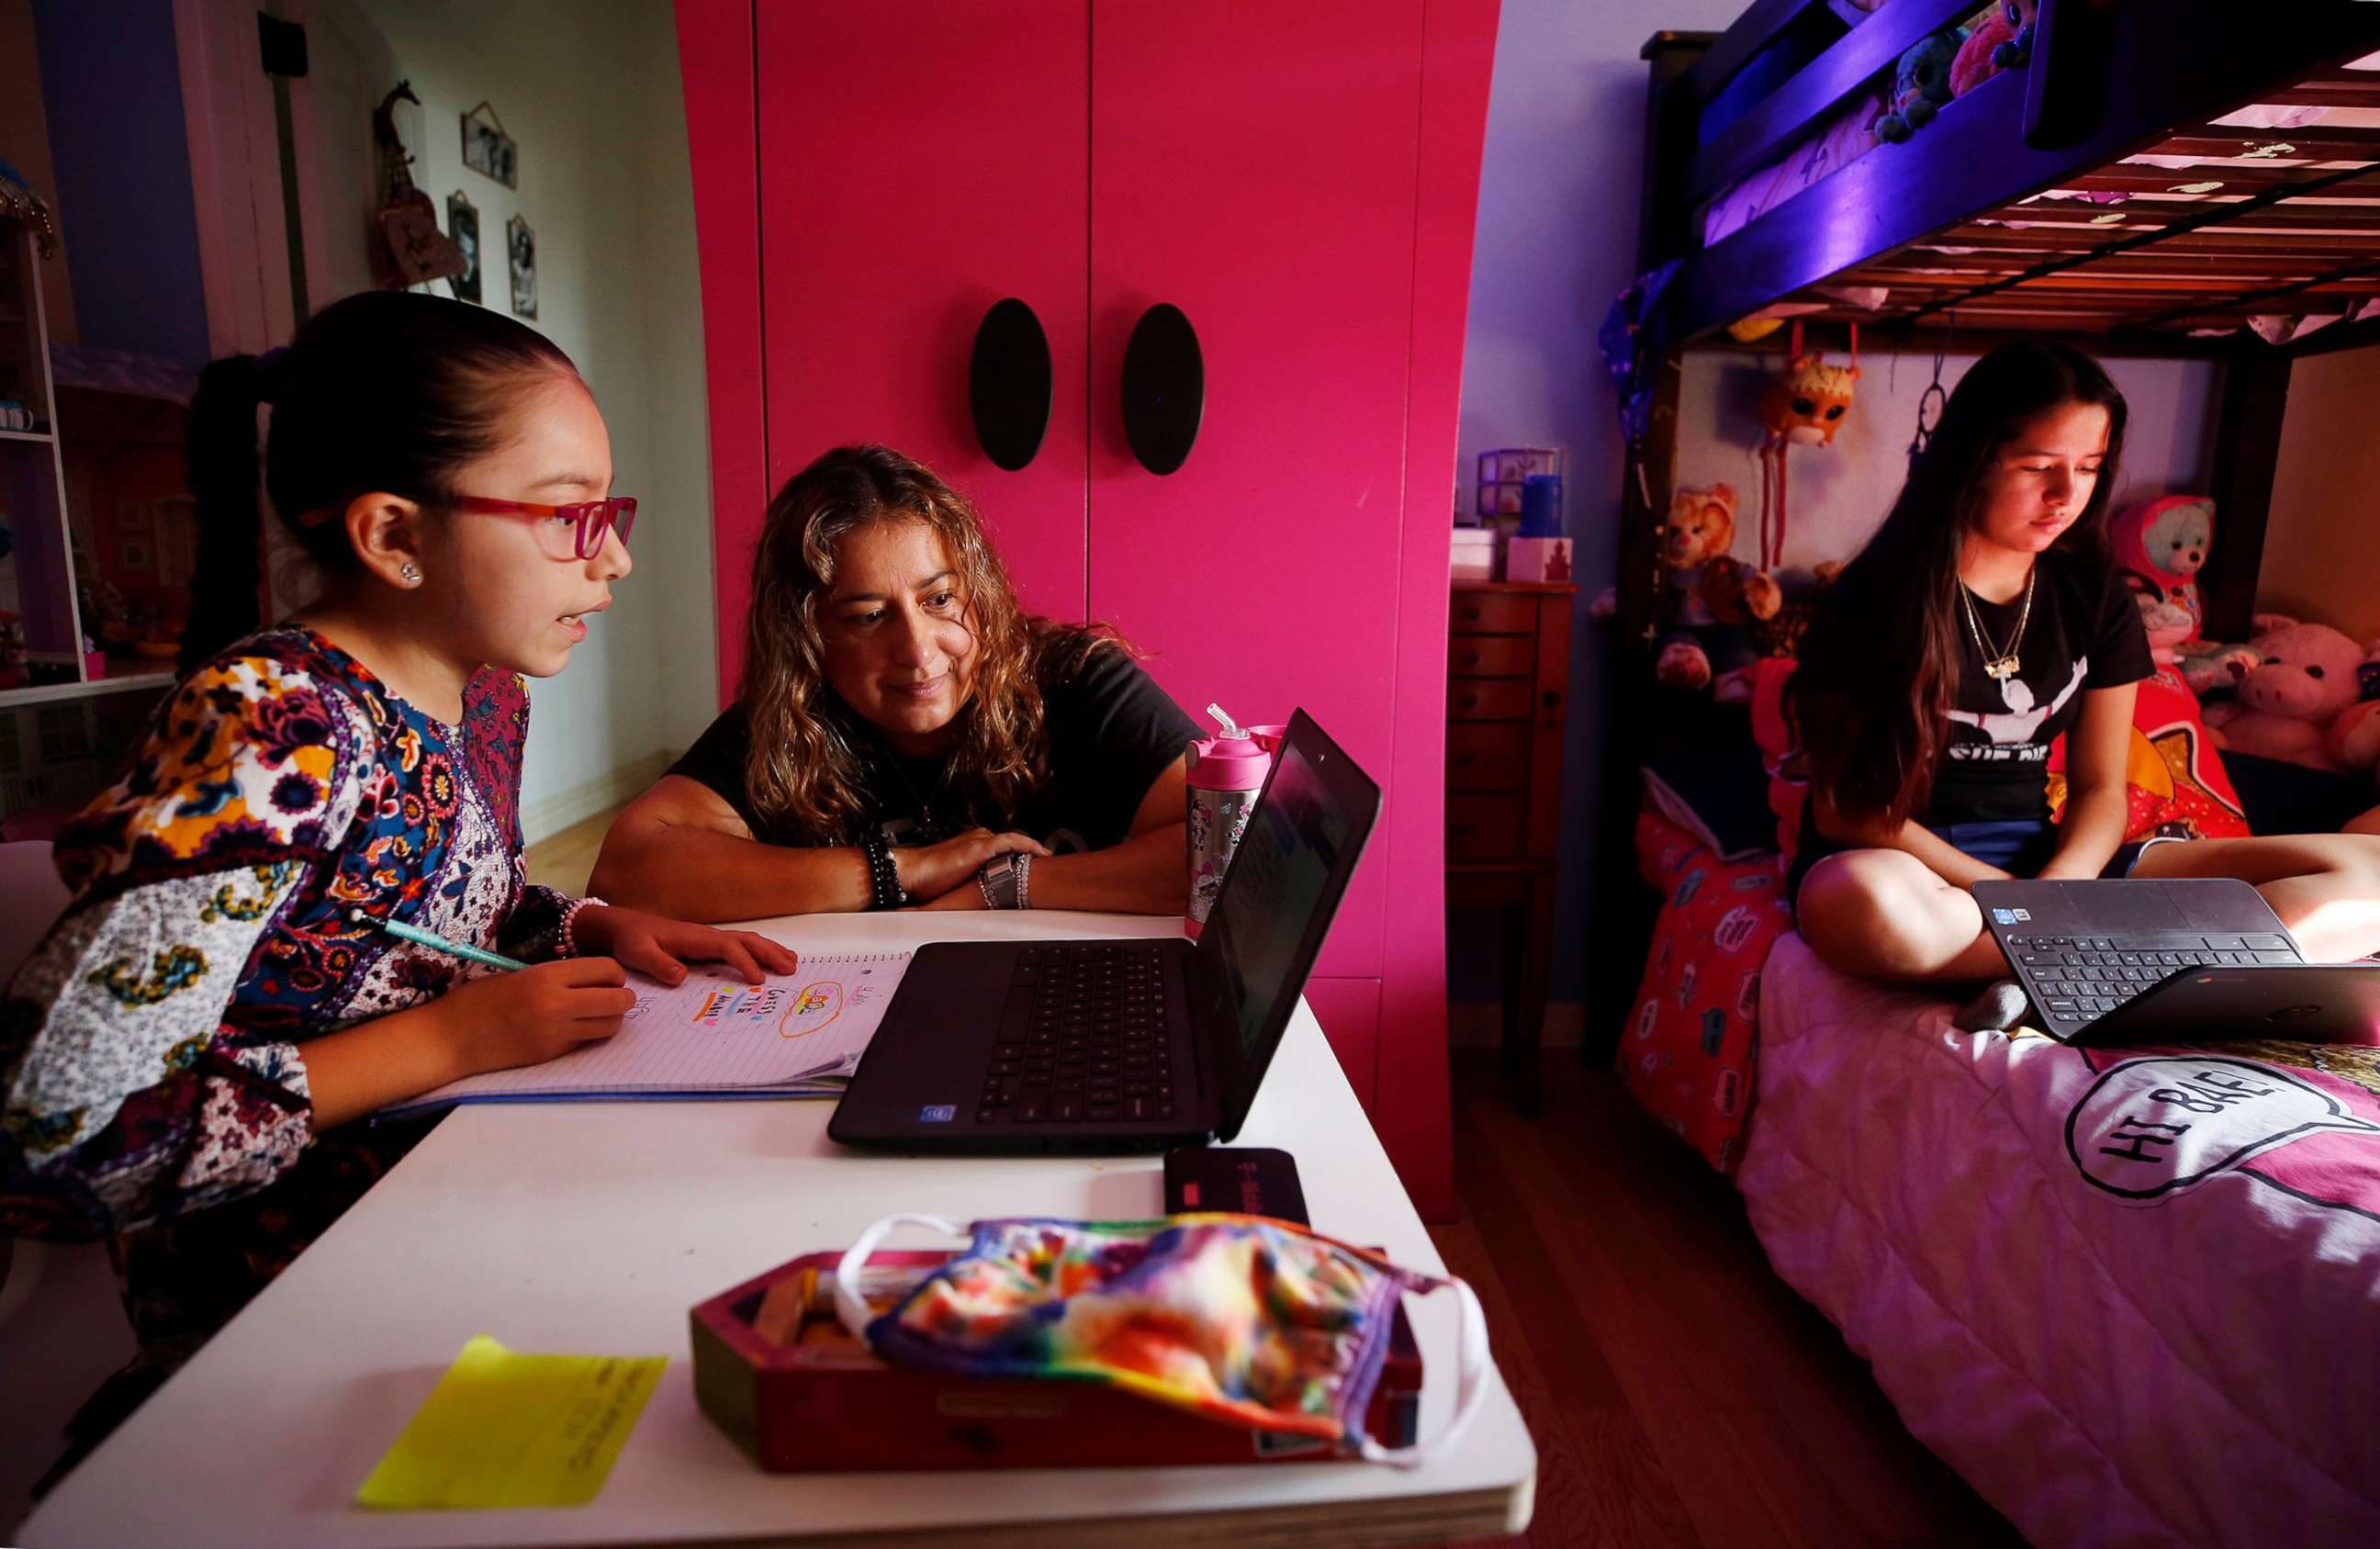 PHOTO: In this Sept. 17, 2020 file photo, children in Los Angeles use laptop computers during remote learning classes at home while their mom assists them.